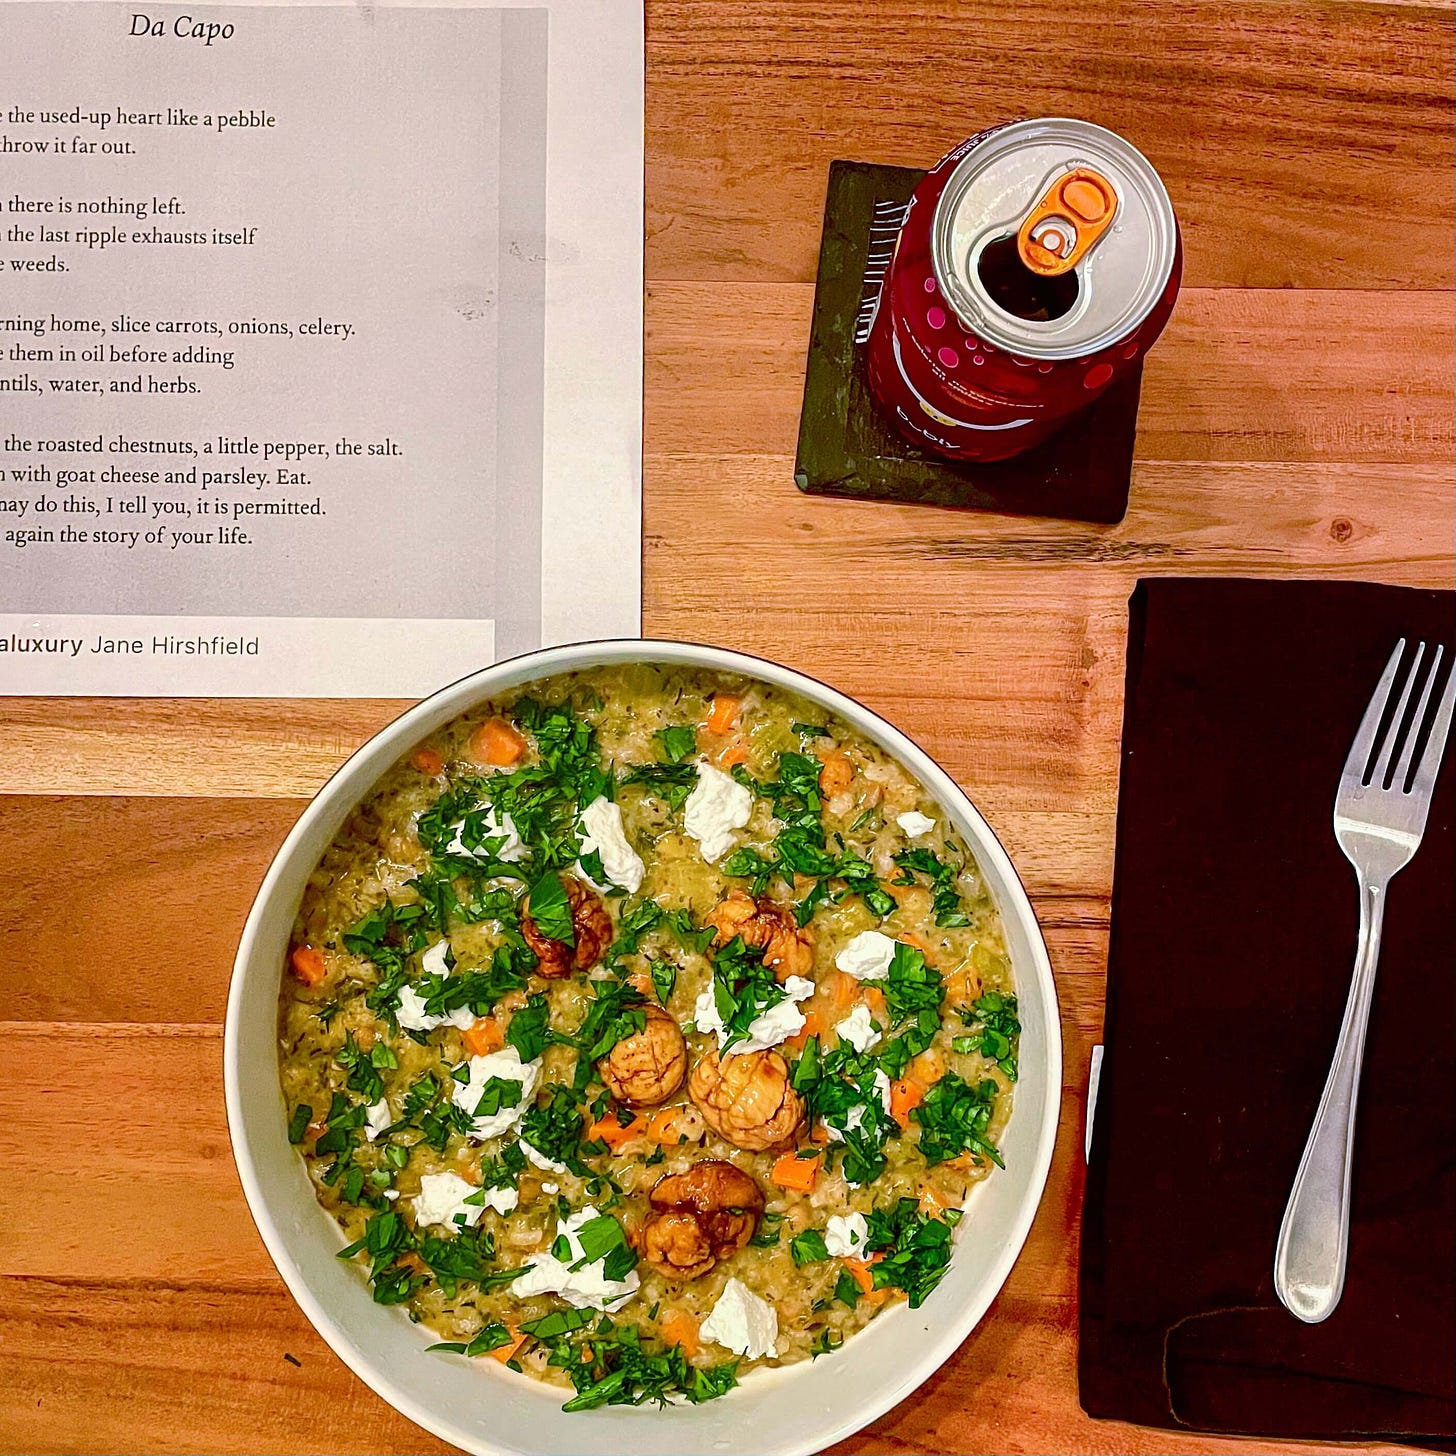 In the top left corner of the photo, the poem Da Capo by Jane Hirshfield. Next to it, a pink can of seltzer. Below, a bowl of risotto flecked with bright spots of carrots, white goat cheese crumbles, lots of parsley, and some chestnuts. To the bowl's right, a silver fork on a black napkin.